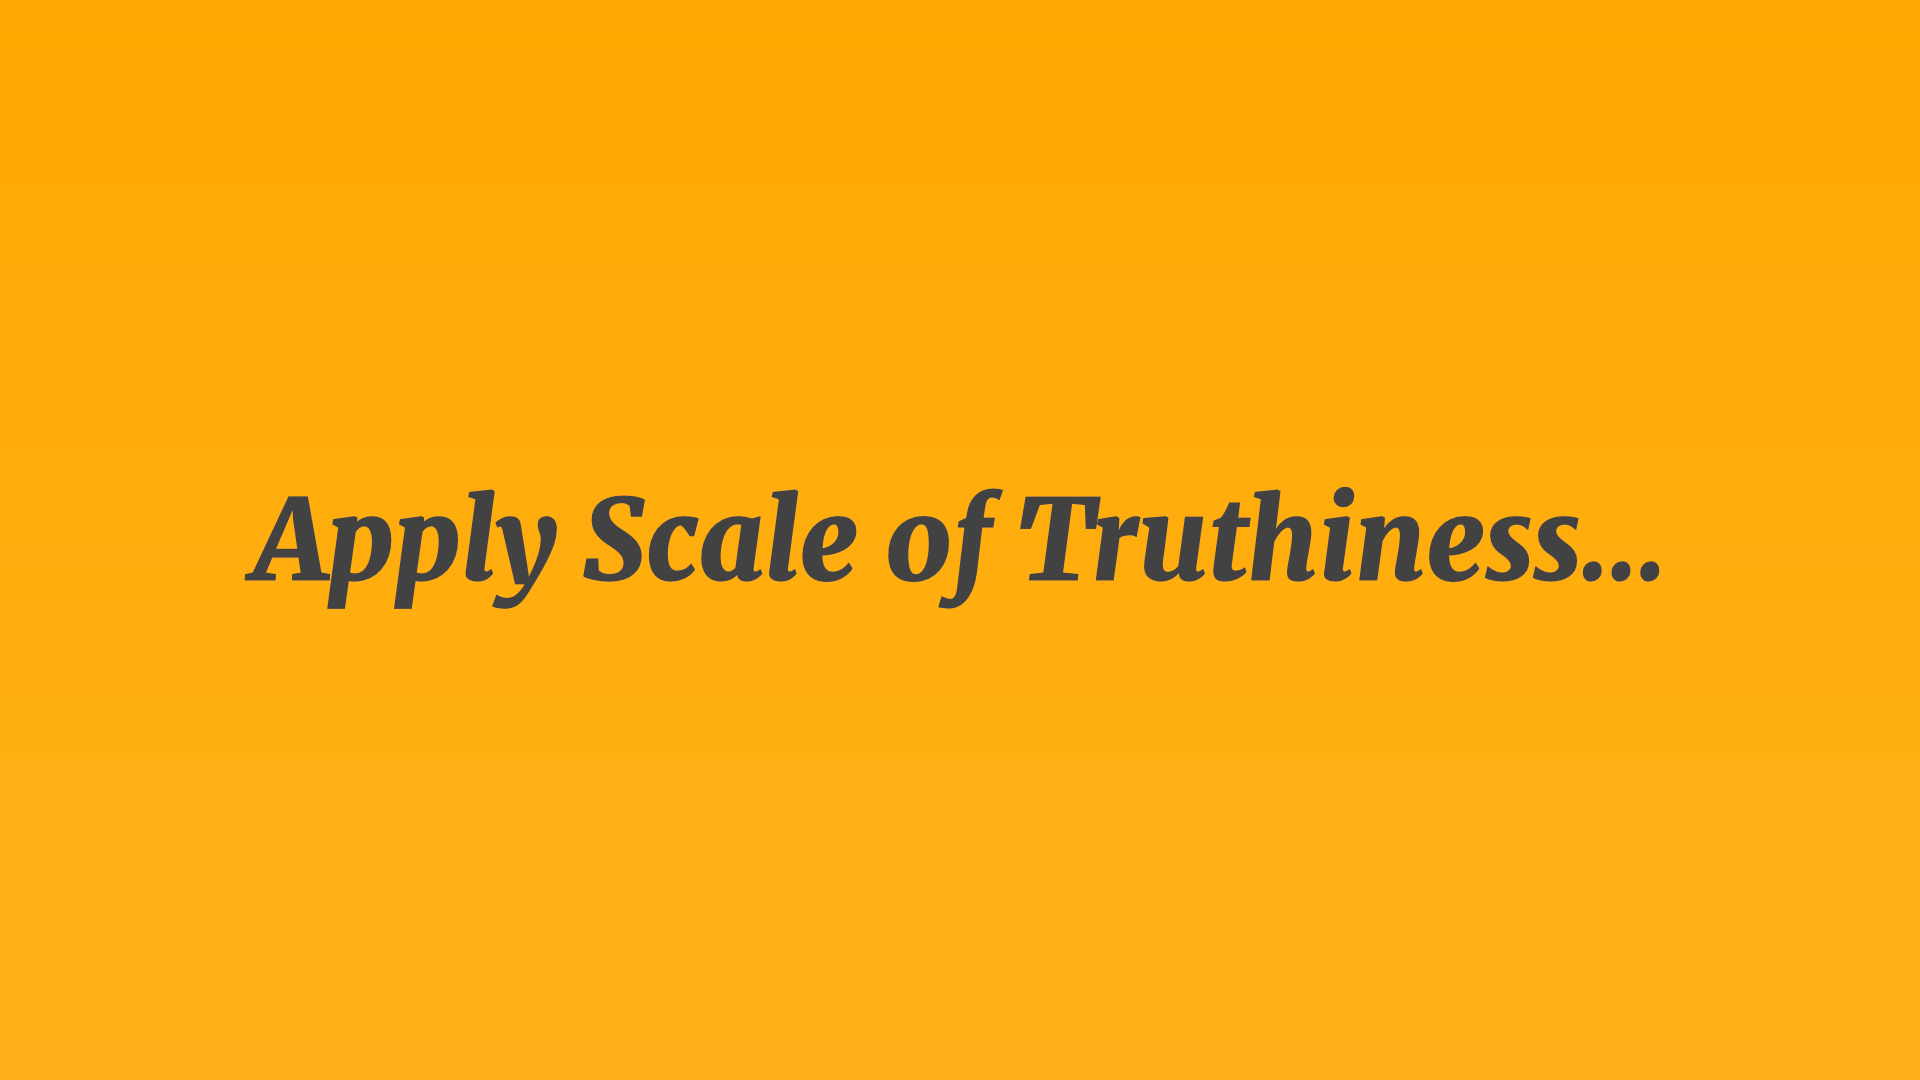 Text heading: Apply Scale of Truthiness…